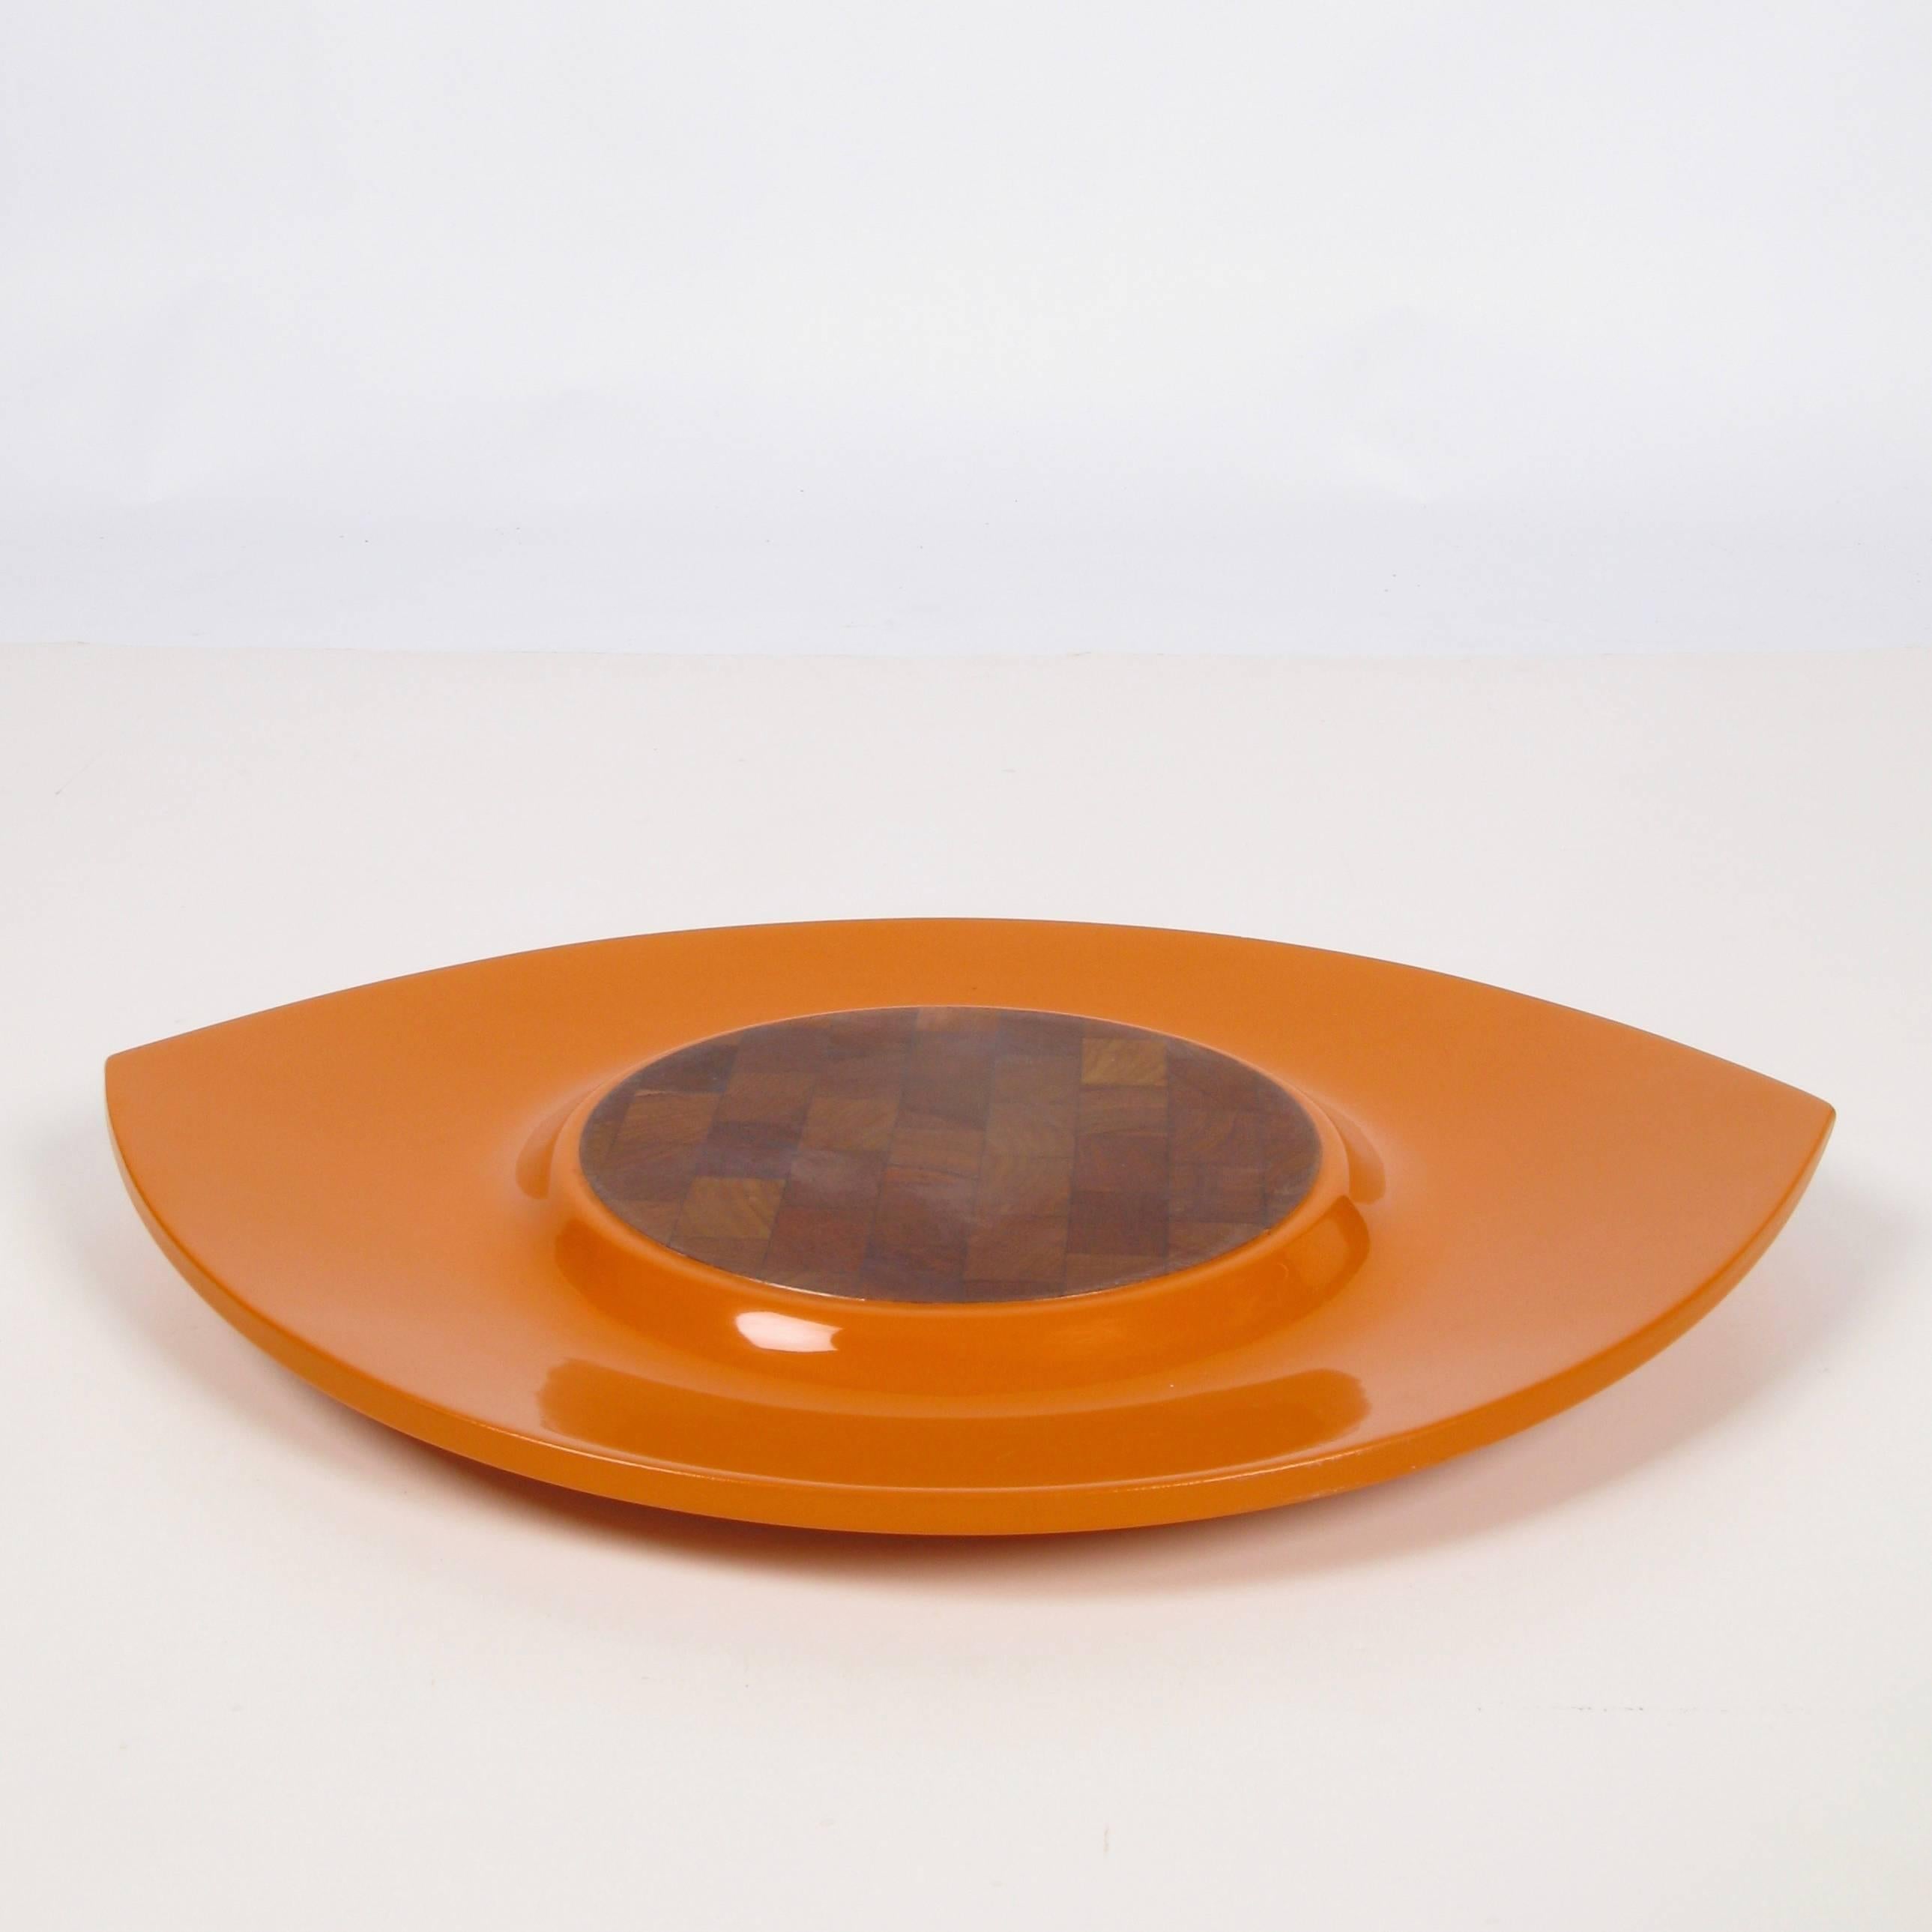 Lacquered tray with teak center designed by Jens Quistgaard for his Festivaal line for Dansk. This rare tray is in excellent condition with only minor scuffs on the edge. Made in Denmark.